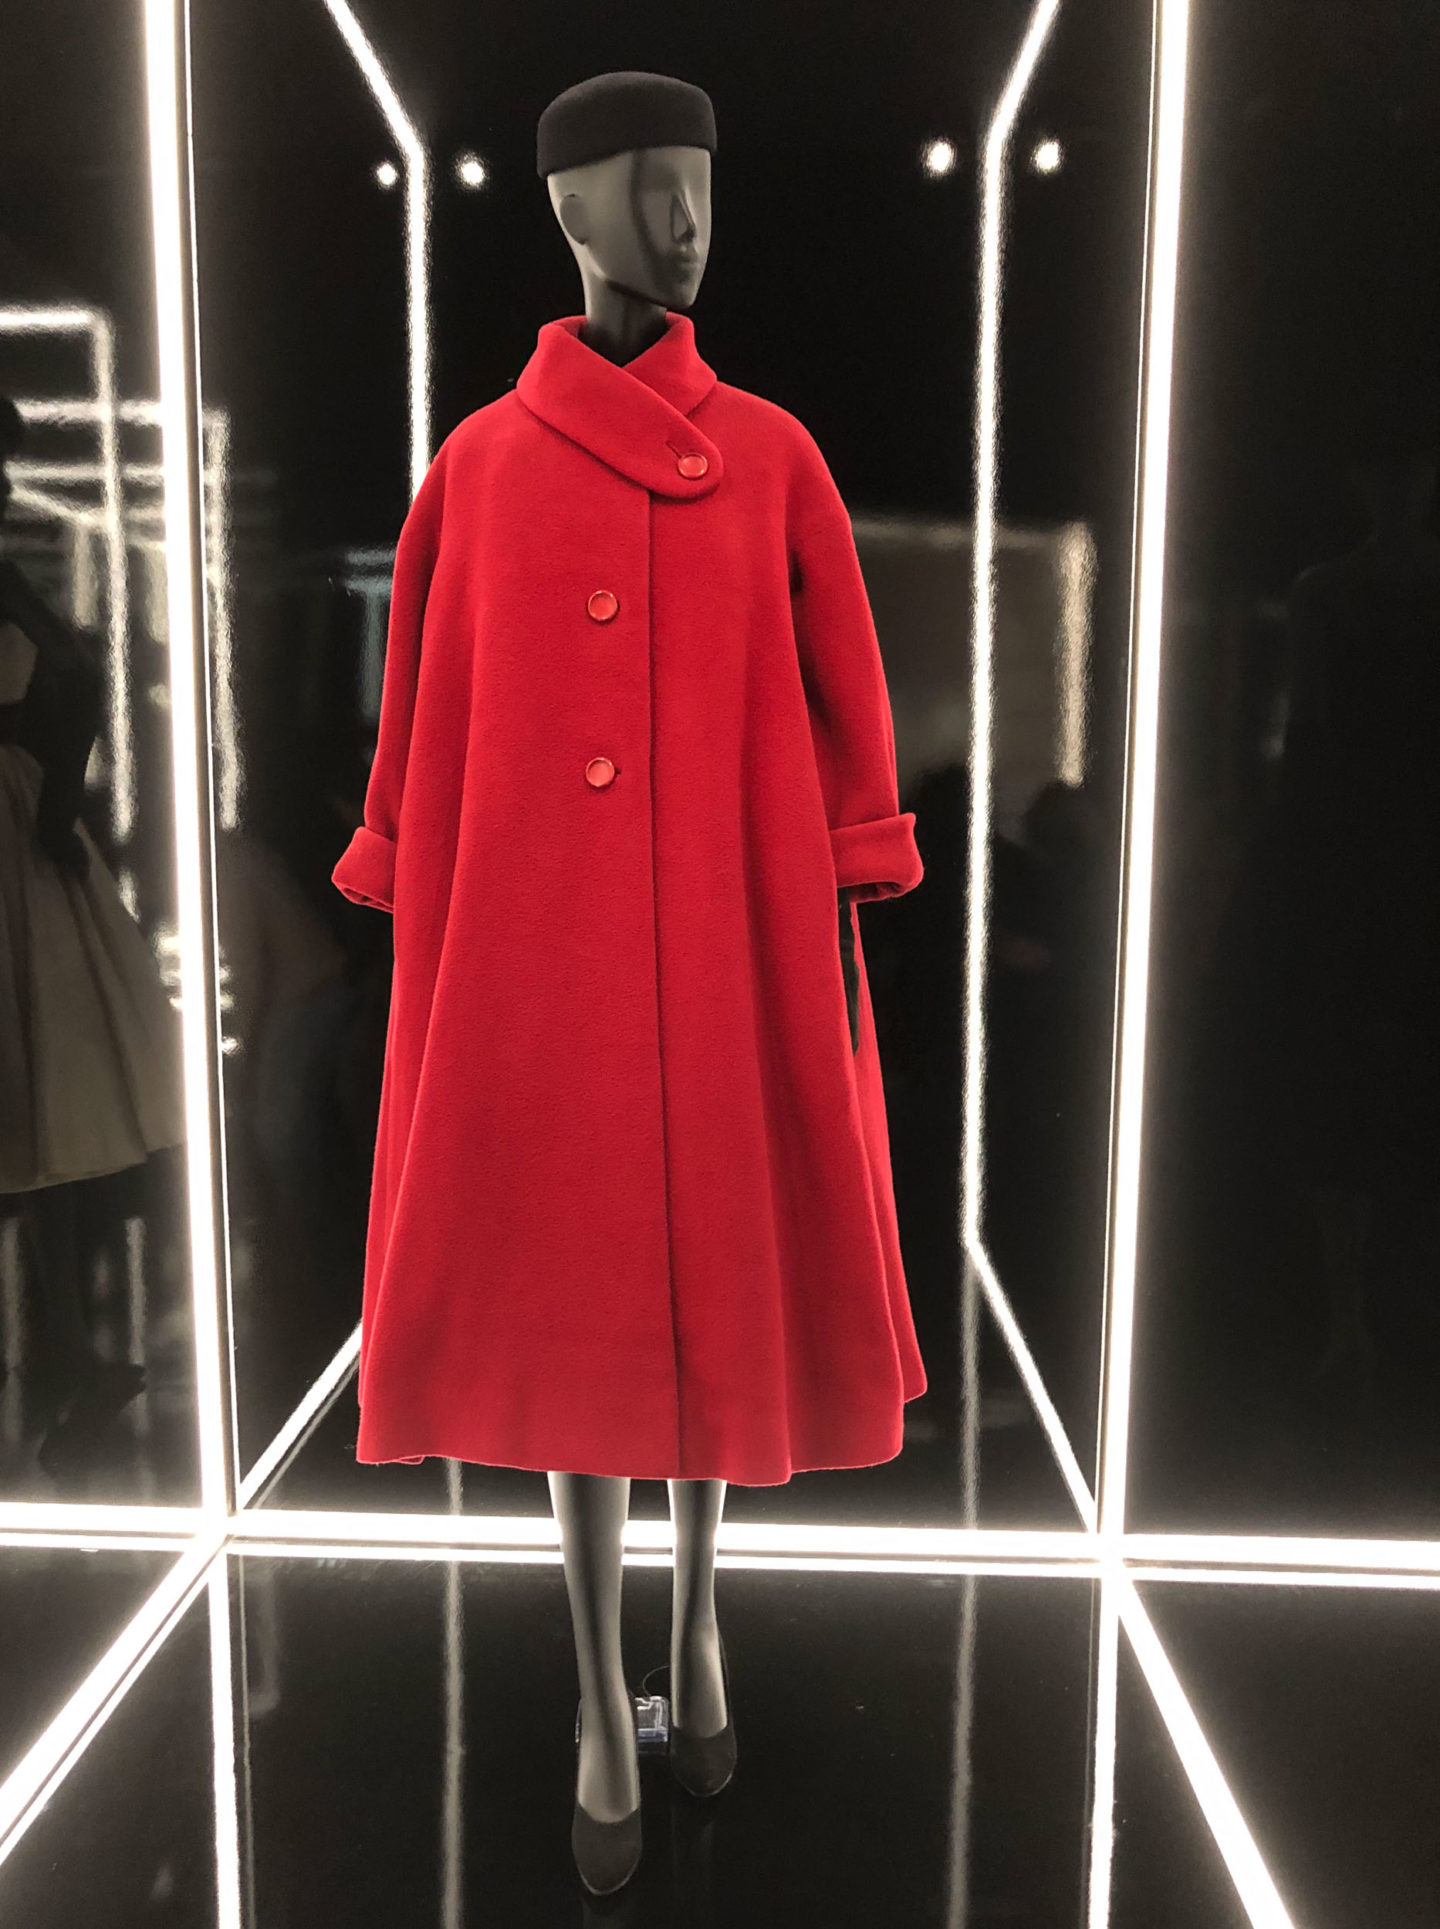 christian Dior red coat